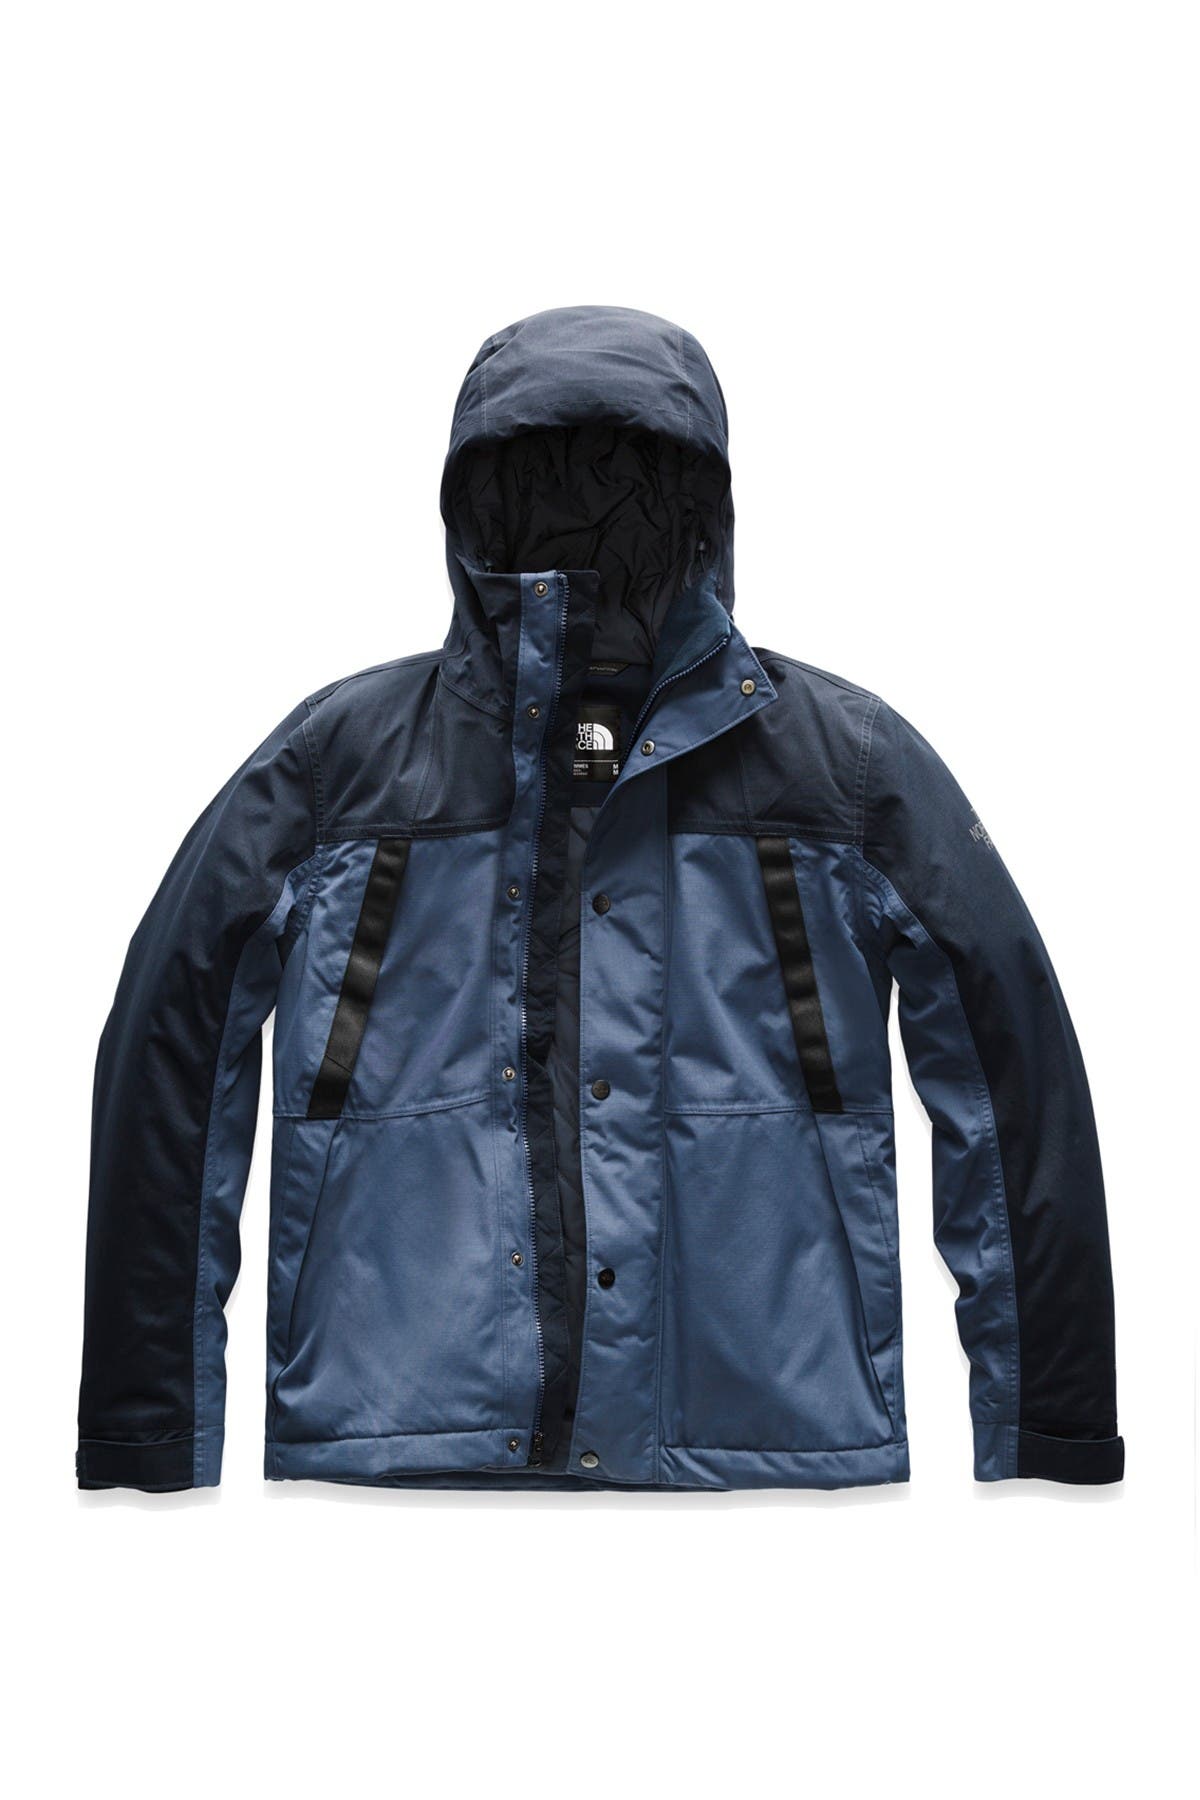 north face insulated rain jacket